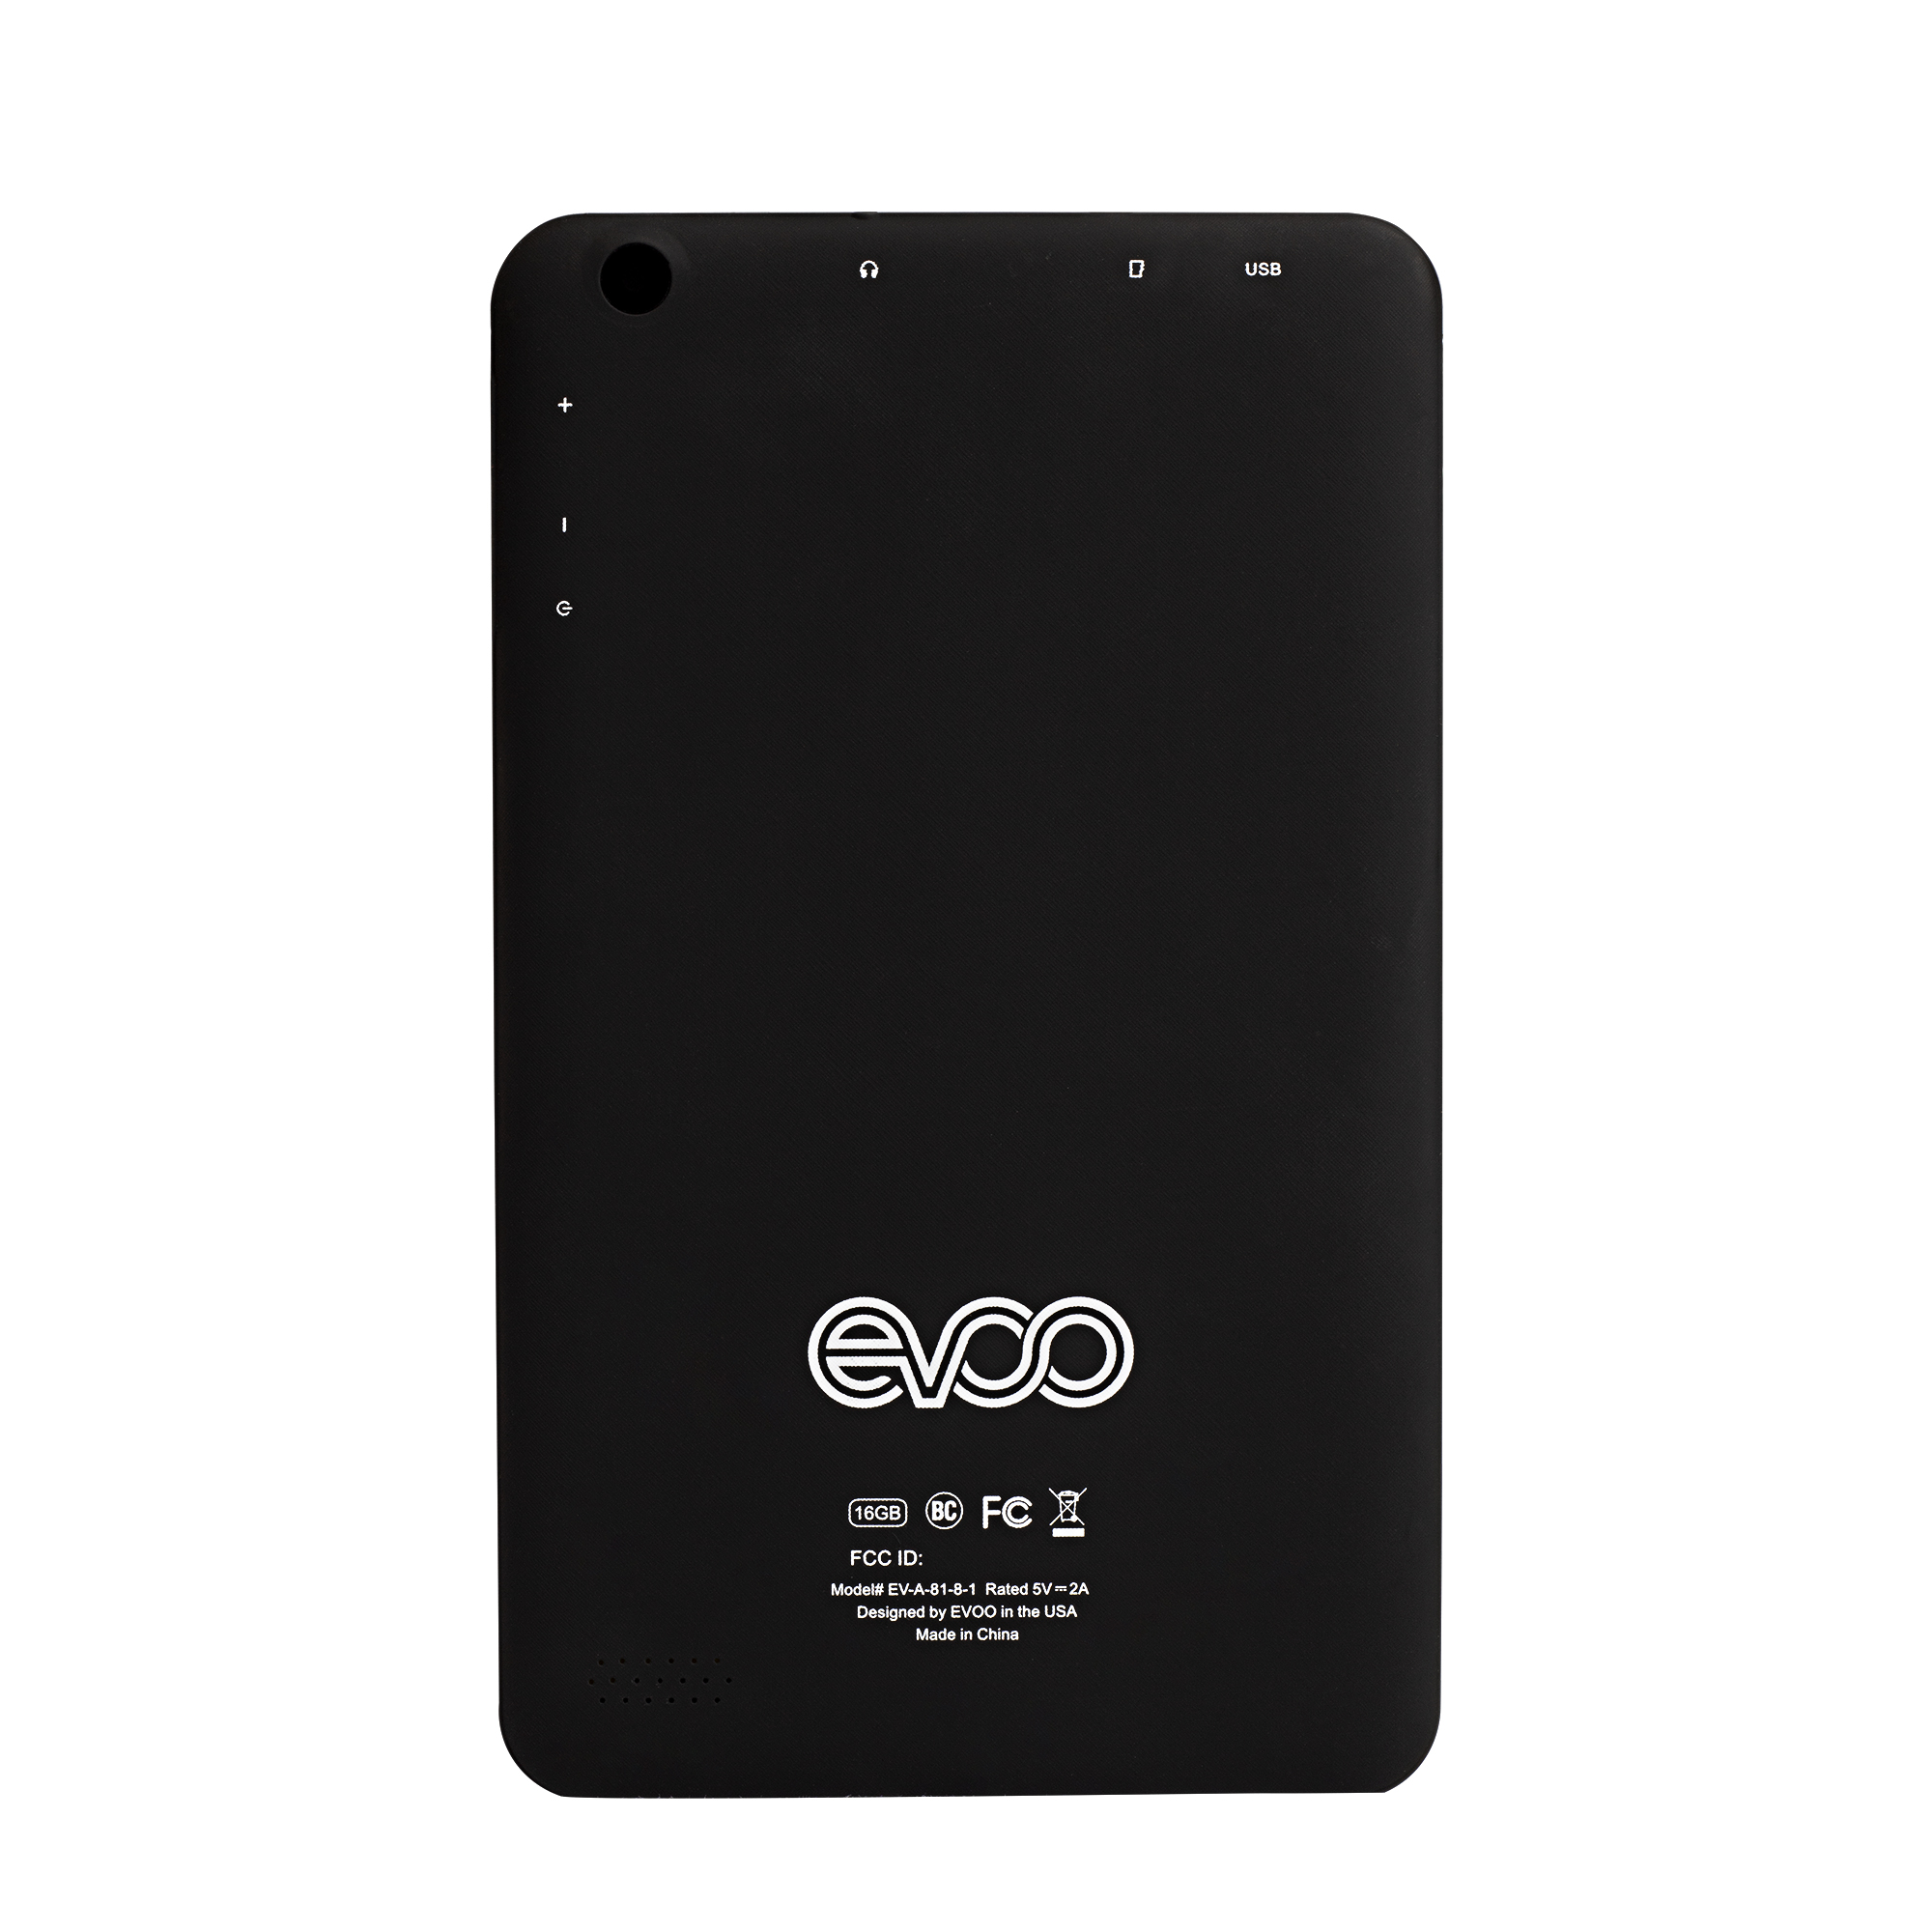 EVOO 8" Tablet, Android 8.1 Go Edition, Quad Core, 16GB Storage, Dual Cameras, Micro SD Slot, Black - image 2 of 4